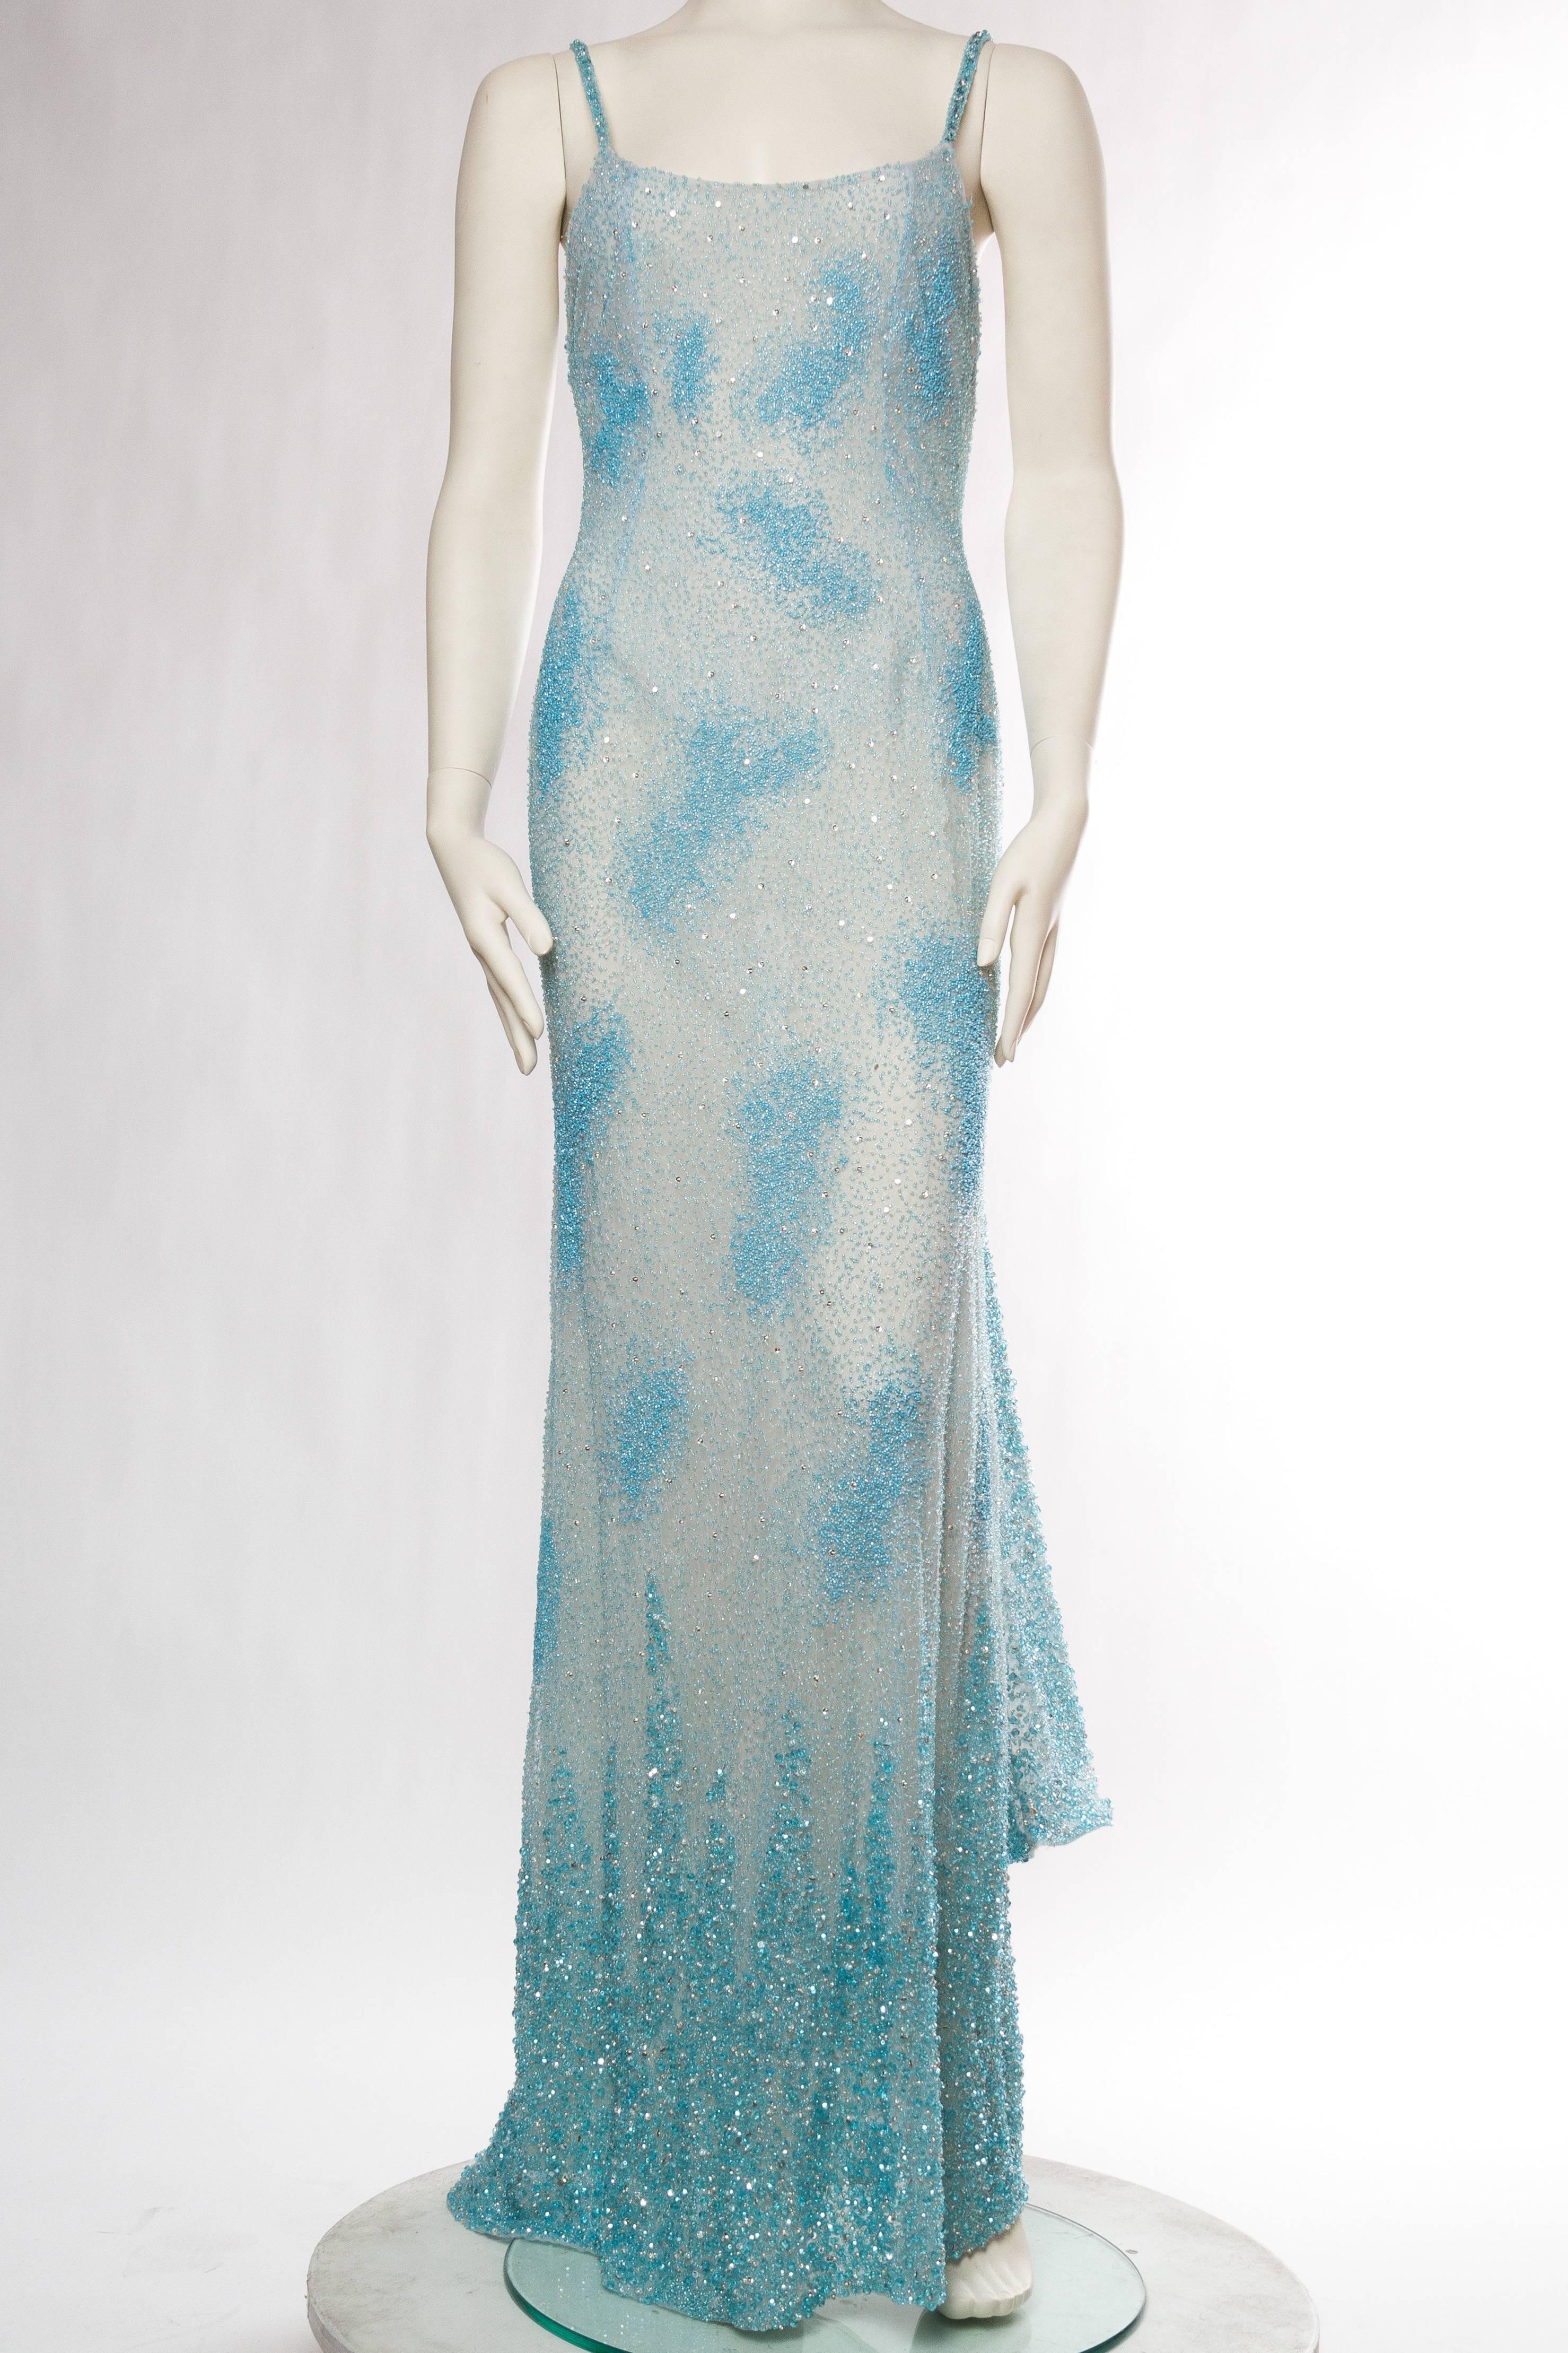 Gown is new with tags which with inflation would have made this gown over $80,000 when new. Truly a phenomenal find and in a great size. The sky blue gown has ages of hand worked beads and crystals upon it which dance and move across the body in